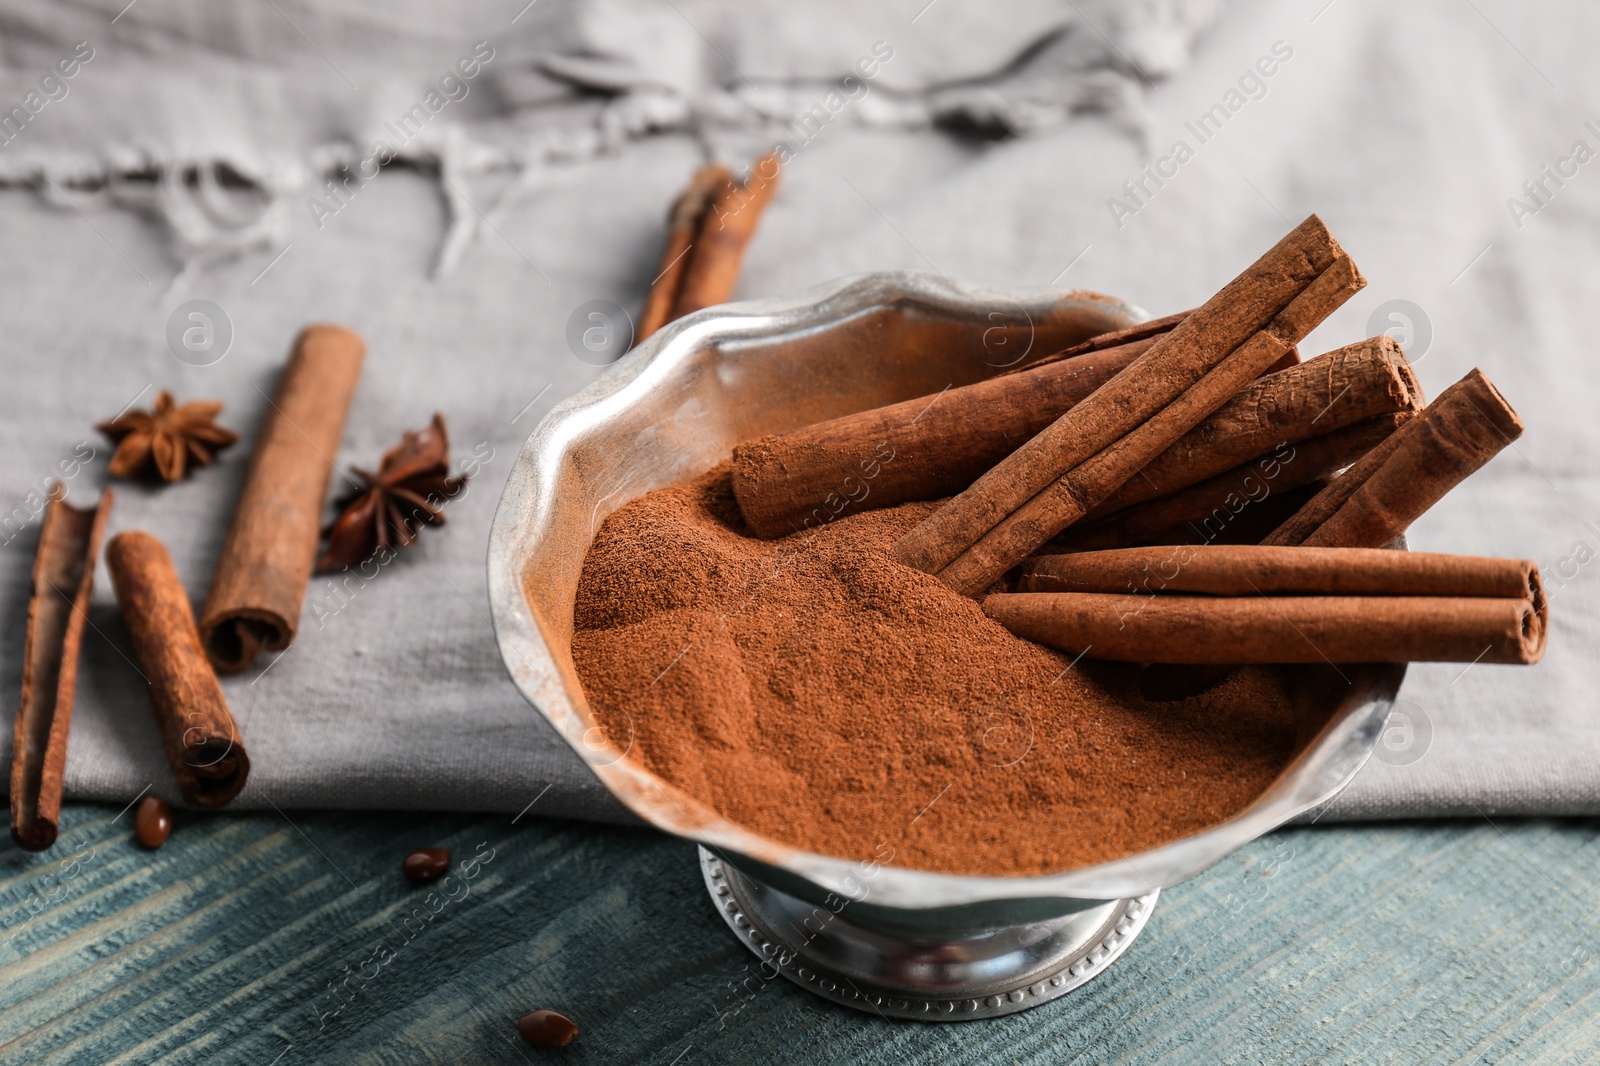 Photo of Bowl with aromatic cinnamon powder and sticks on wooden background